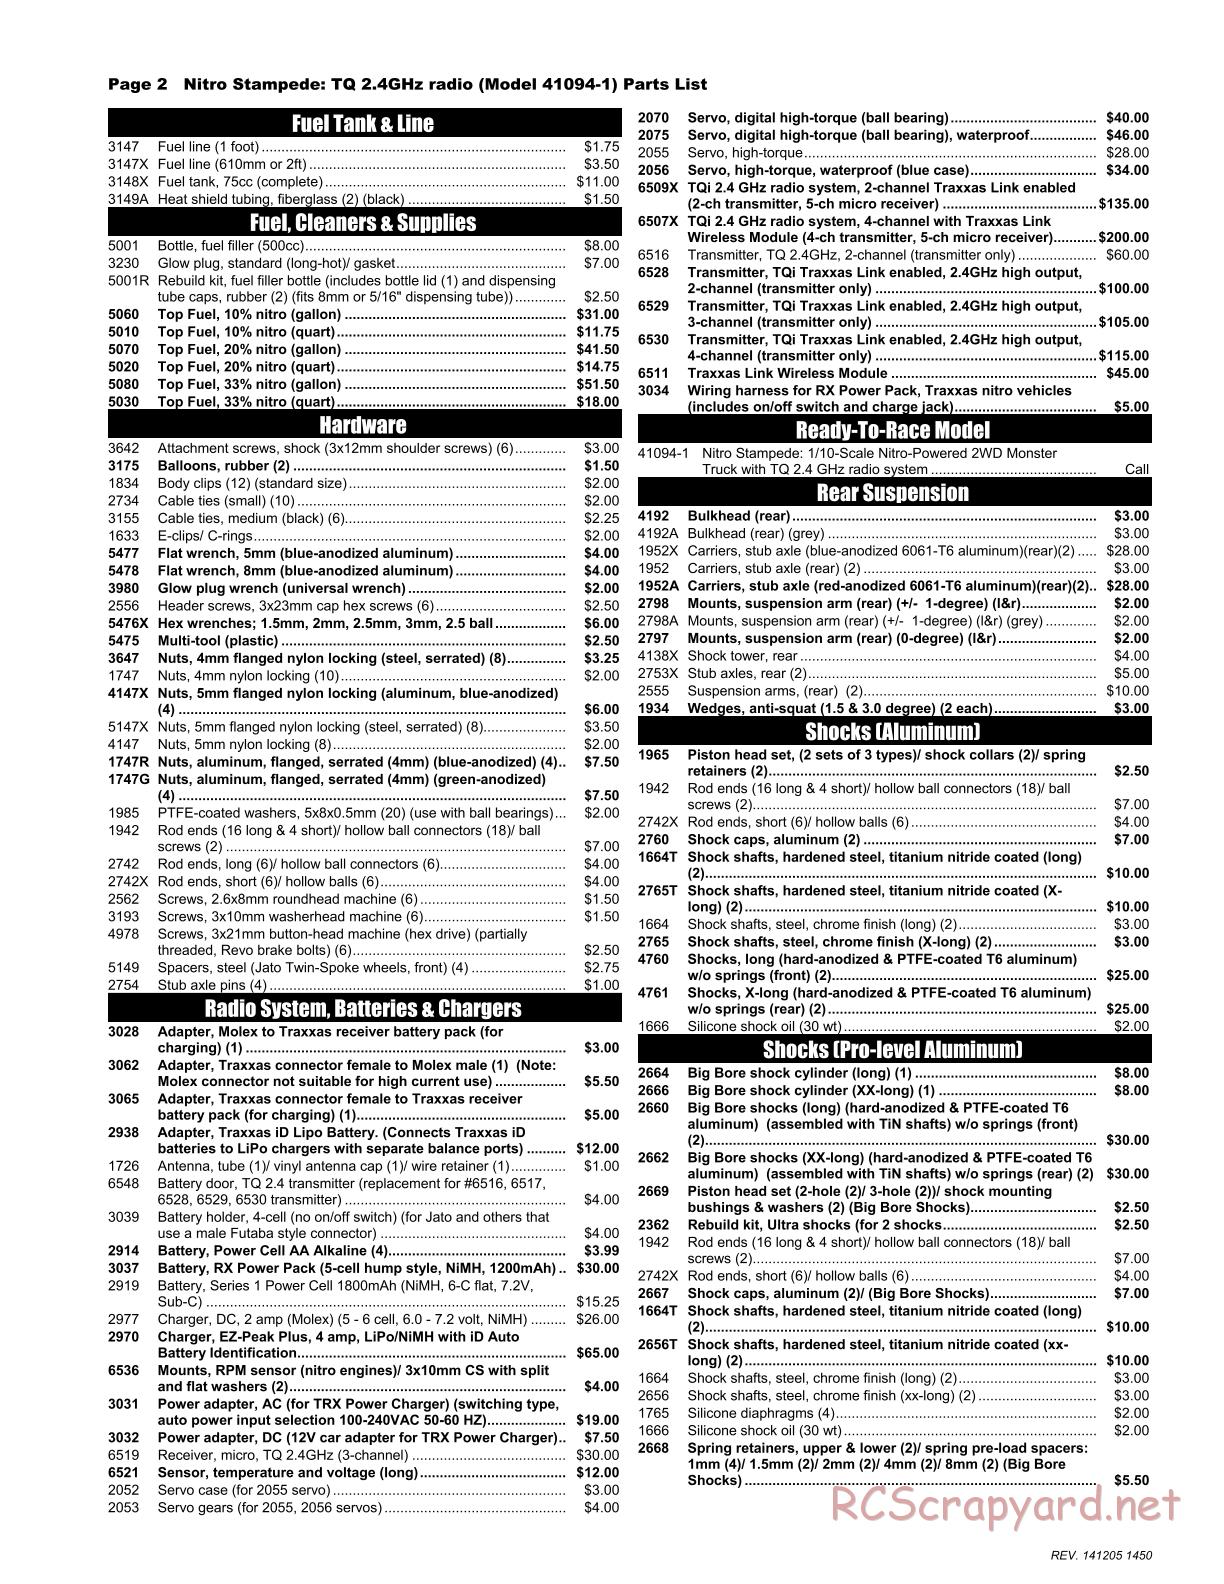 Traxxas - Nitro Stampede (2015) - Parts List - Page 2